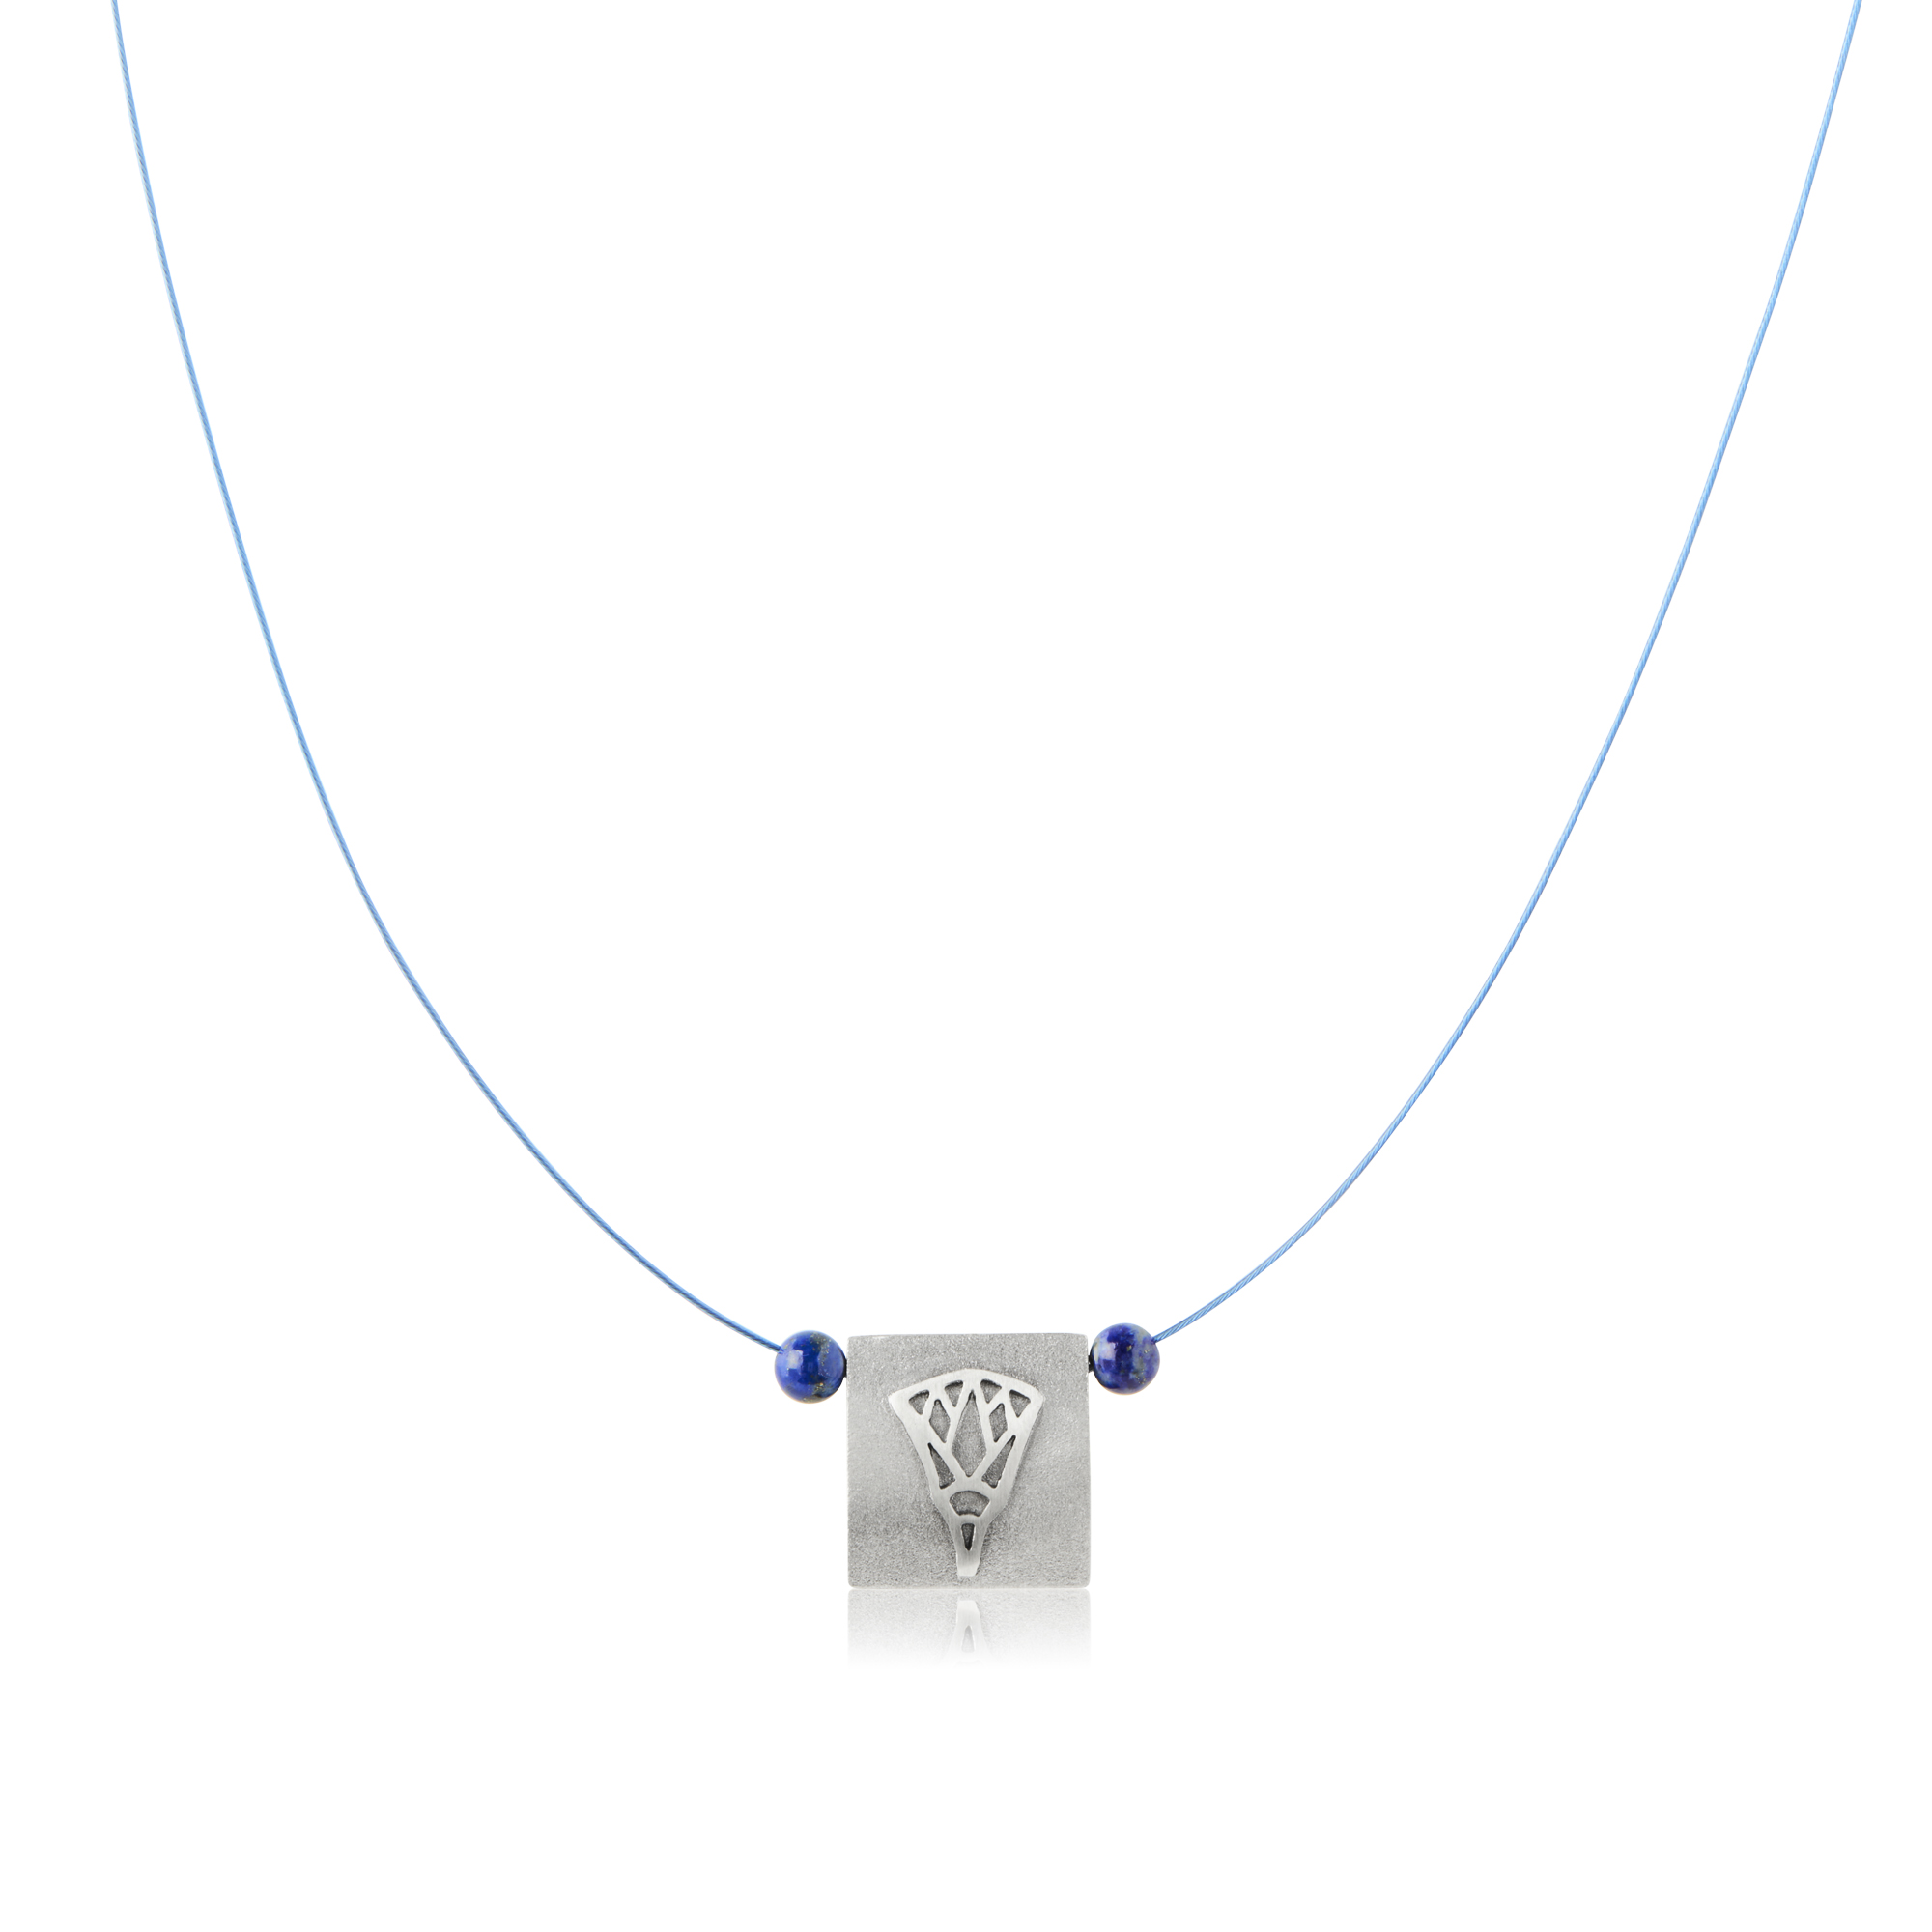 Two faces piece necklace (lotus-ankh)